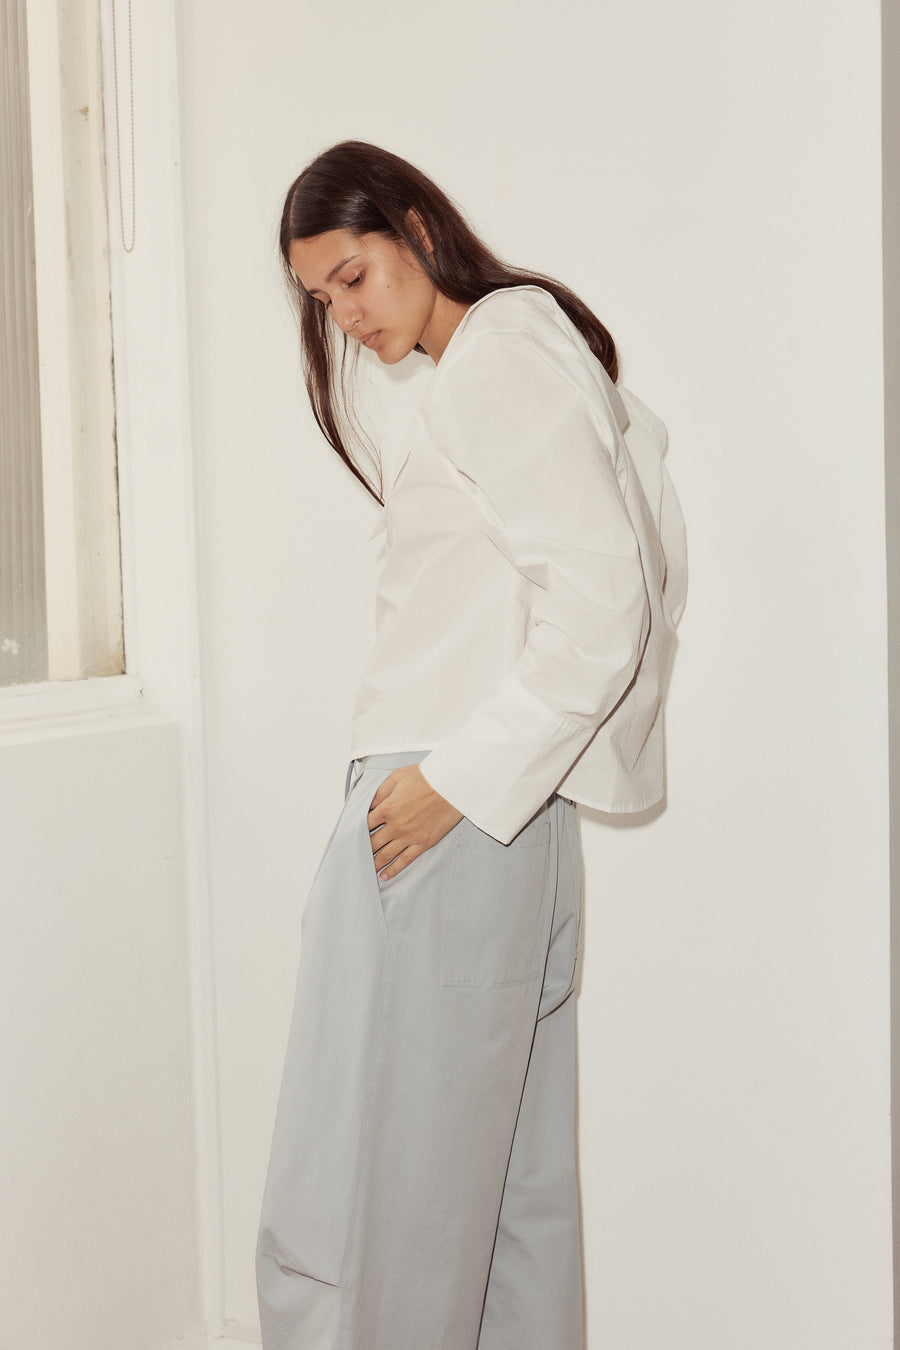 side shot of female model putting hand in the side pocket of Deiji Studios sky blue cotton twill pants. Pant has deep side and back pockets, and a tuck at each knee.